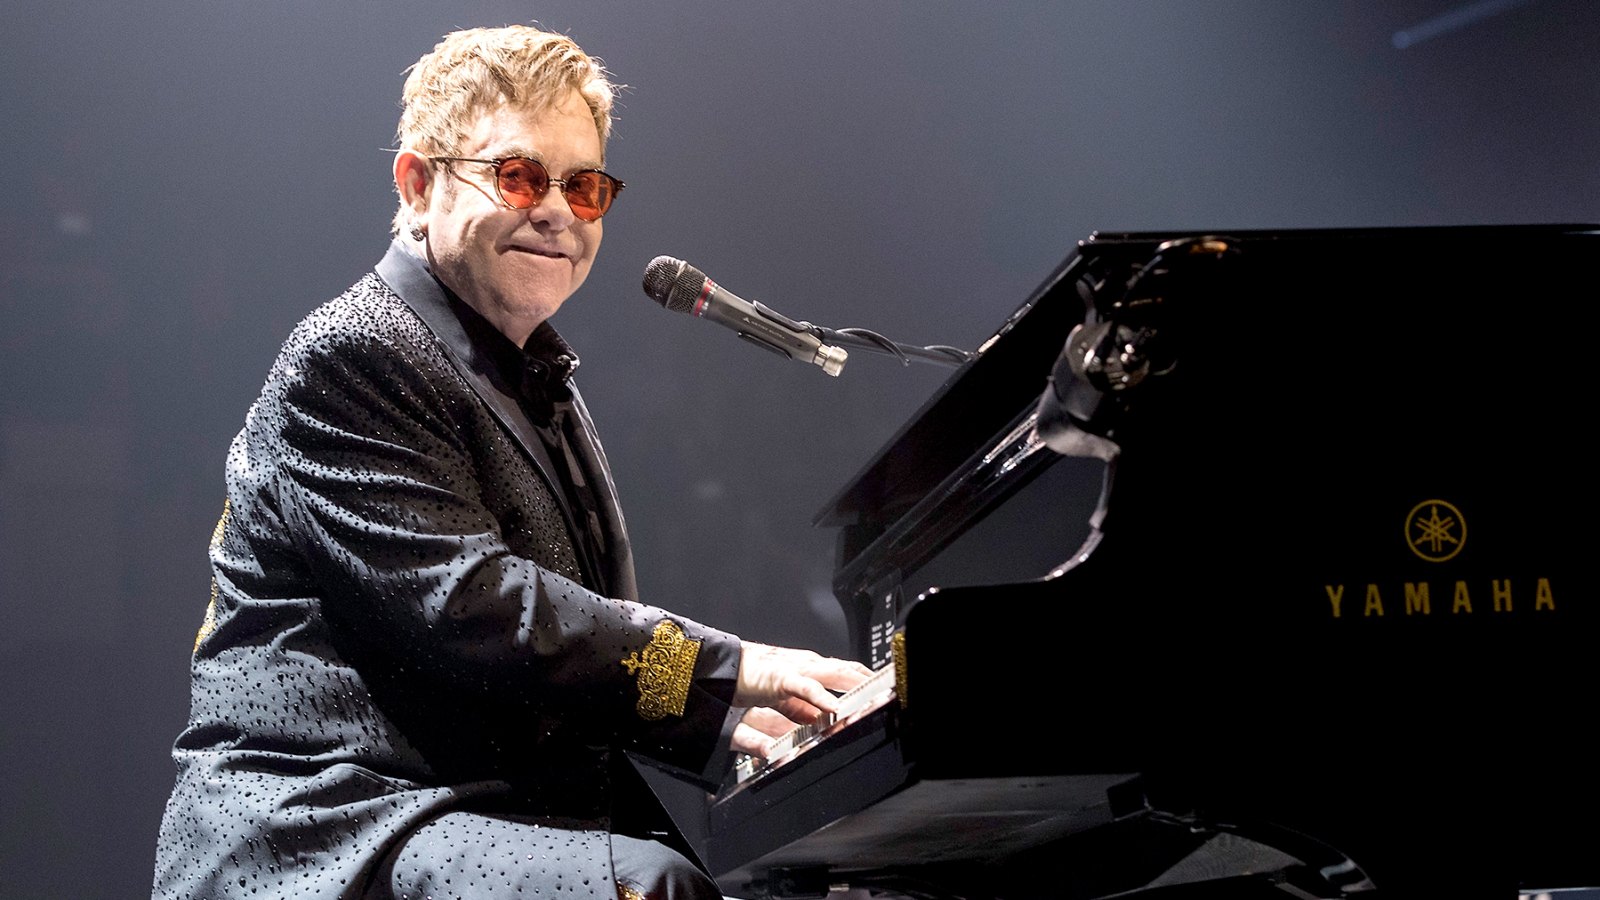 Elton John performs on stage at Save On Foods Memorial Centre on March 11, 2017 in Victoria, Canada.